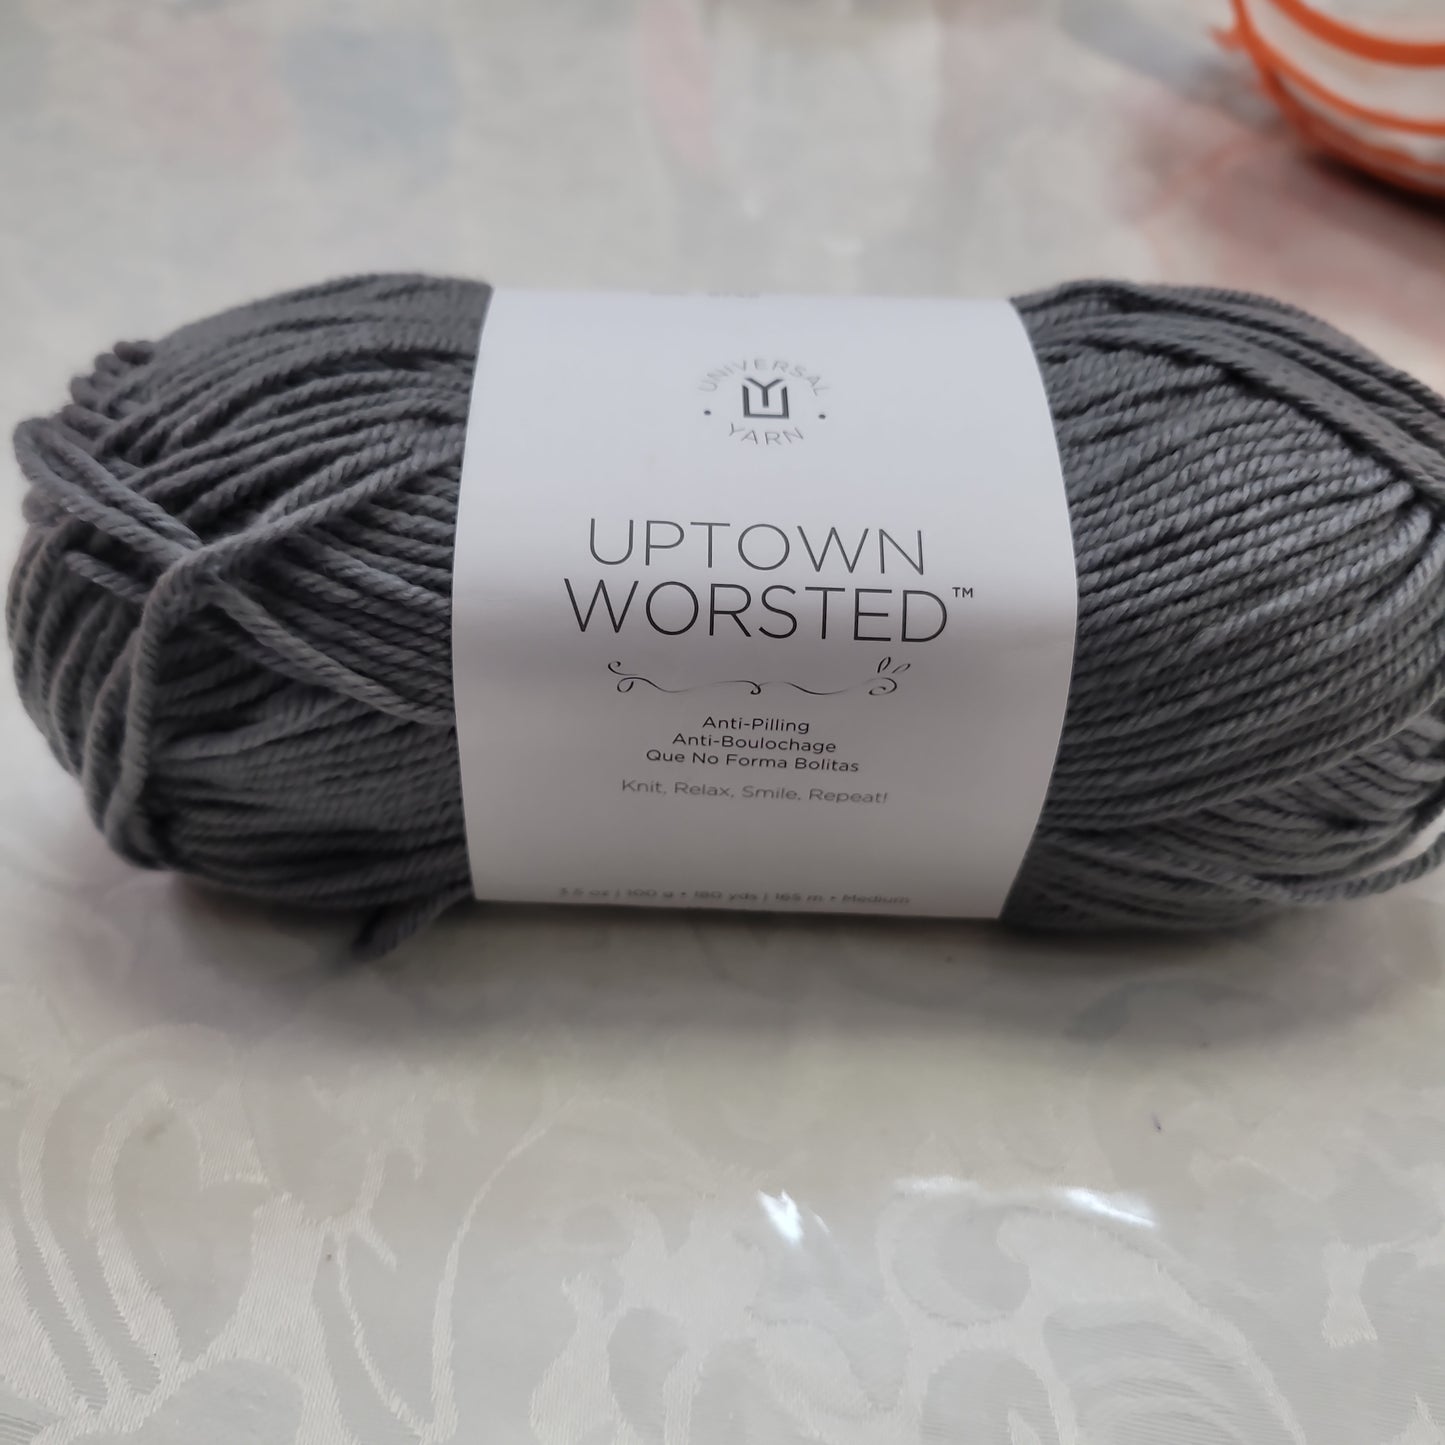 Uptown worsted